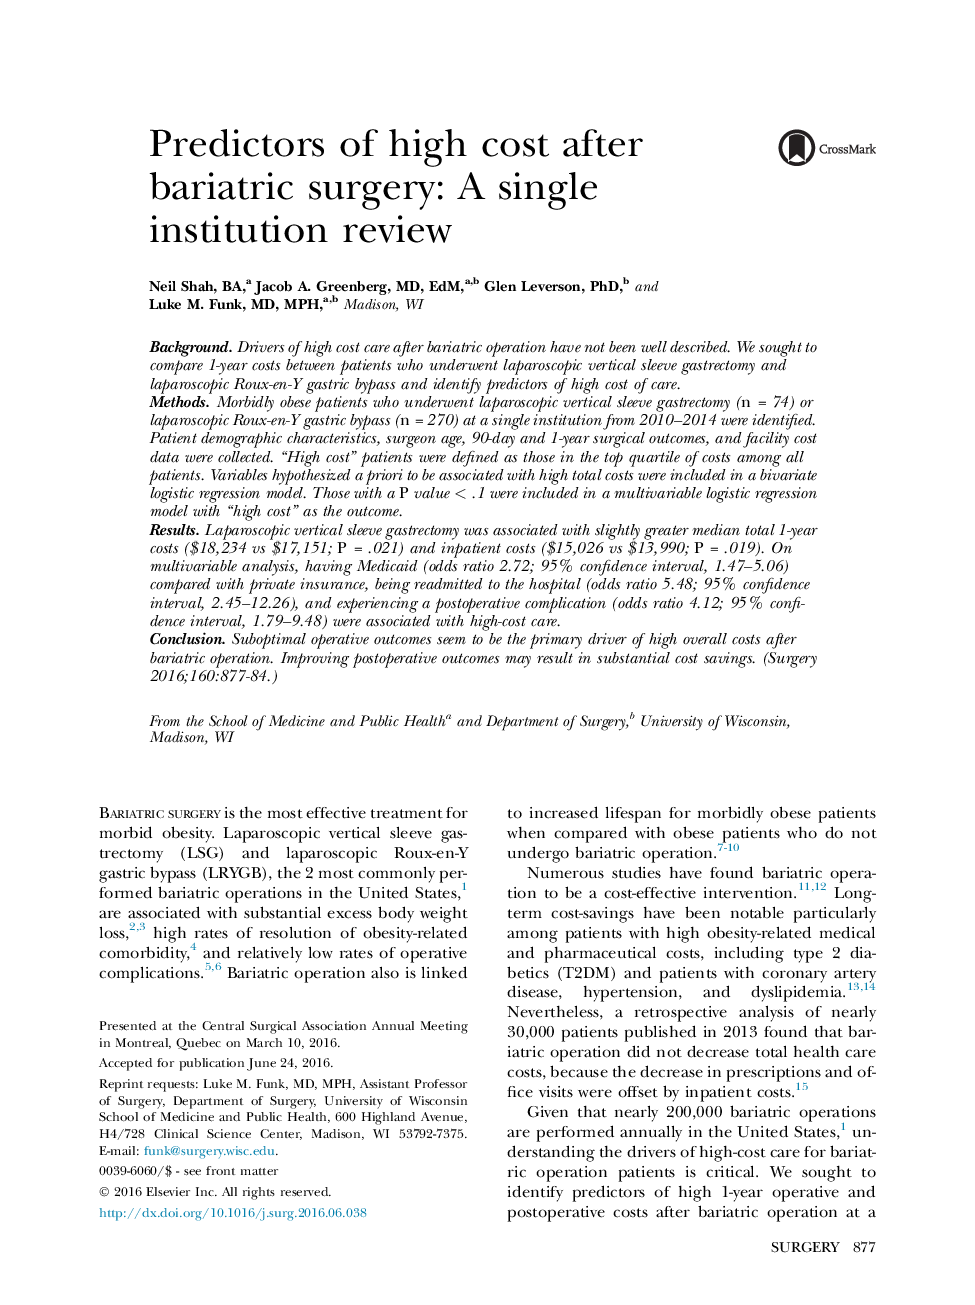 Predictors of high cost after bariatric surgery: A single institution review